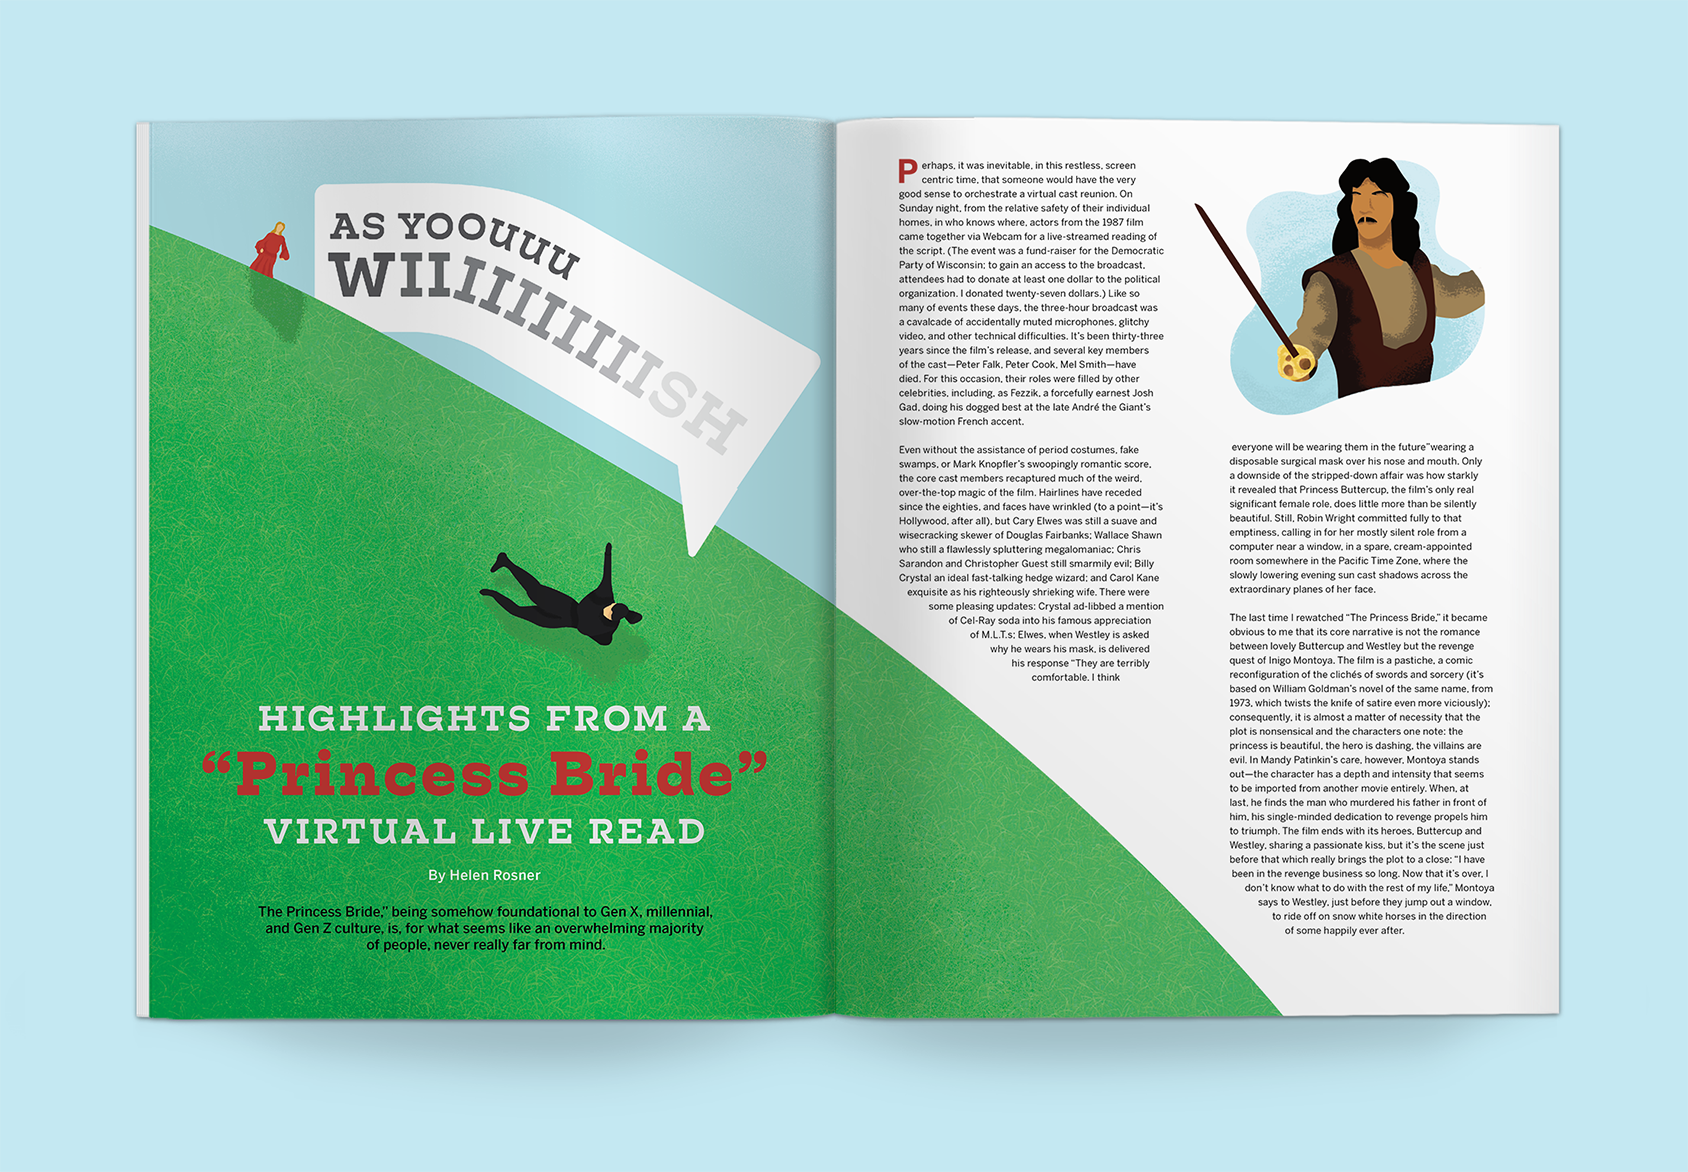 Mockup of a magazine spread, the article title is 'Highlights from a Princess Bride virtual live read by Helen Rosner'. The article features a large illustration of the character Wesley rolling down a hill with a text bubble 'AS YOUU WIIIIISH' above him, the character Buttercup is in the background. Article also feautres a spot illustration of Inigo Montoya holding a sword.